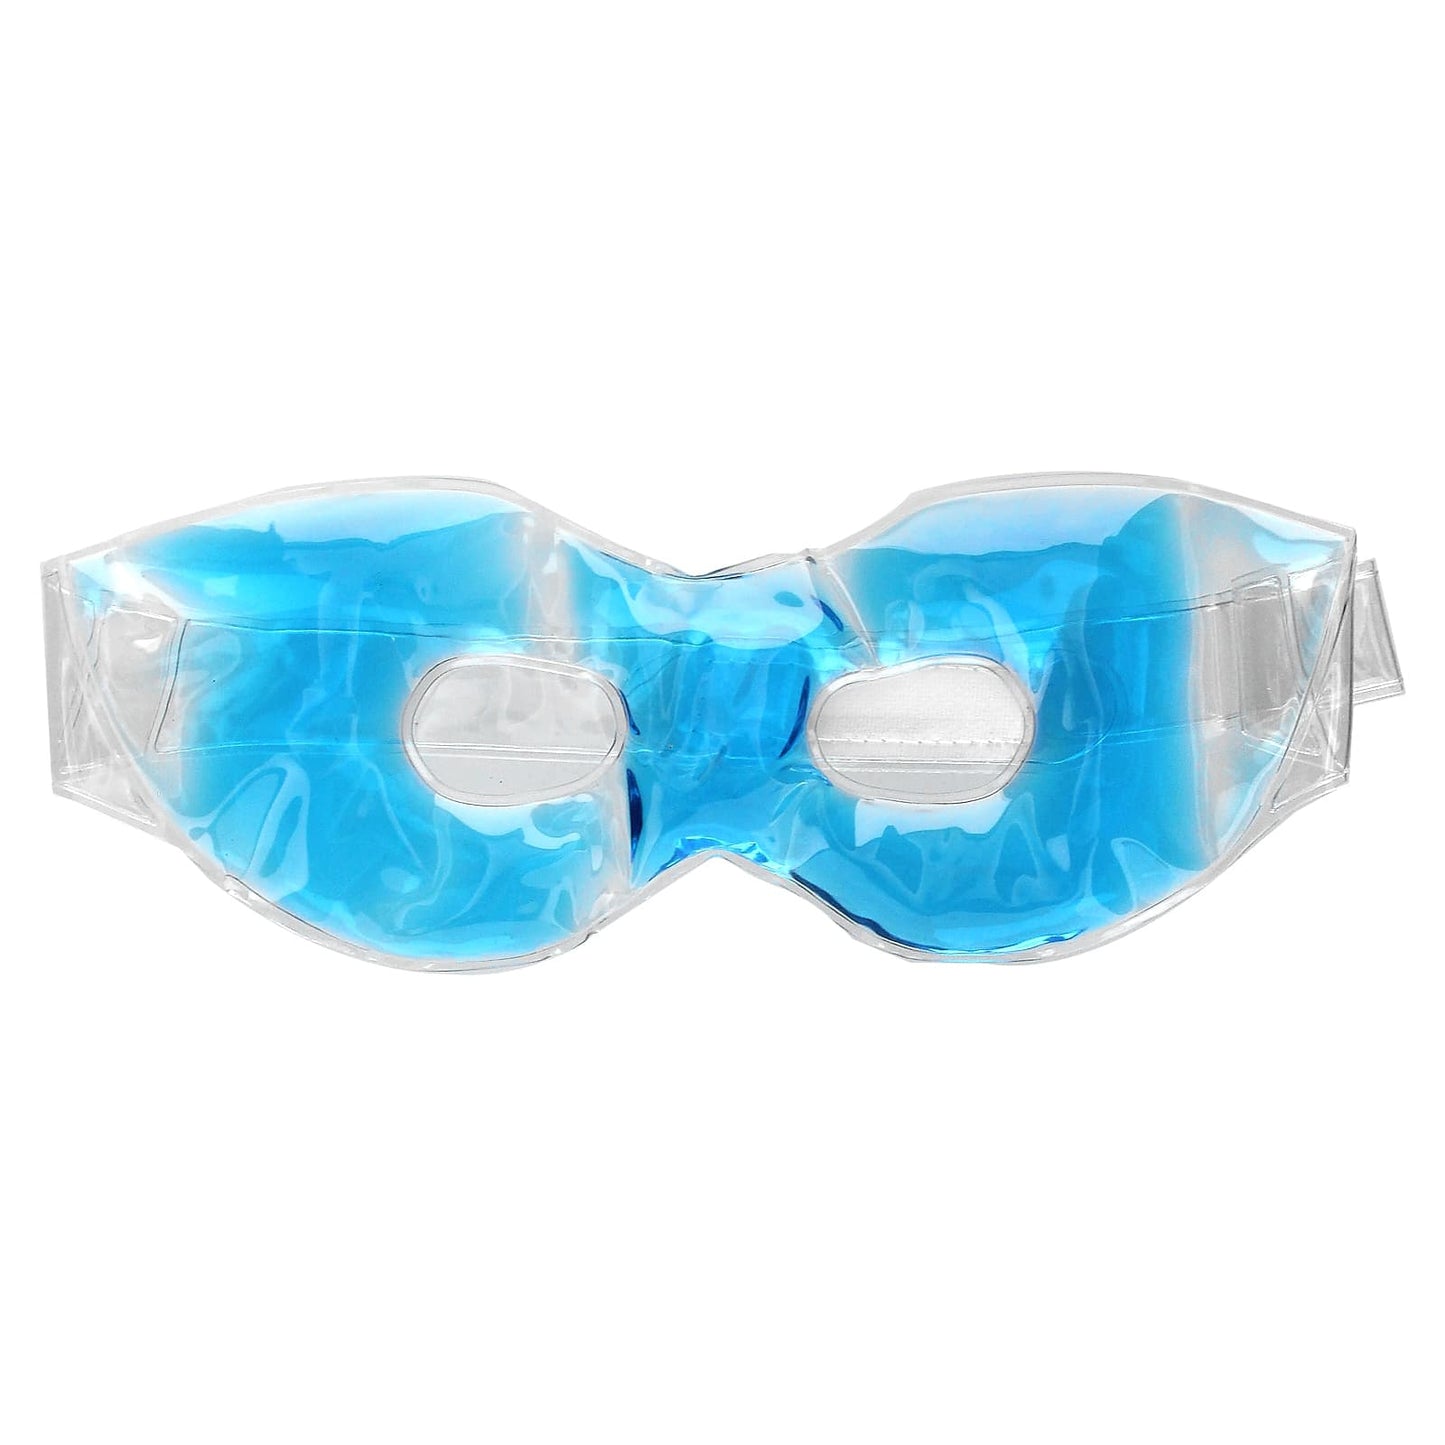 Flents, Eye Mask, Hot and Cold Therapy, 1 Mask